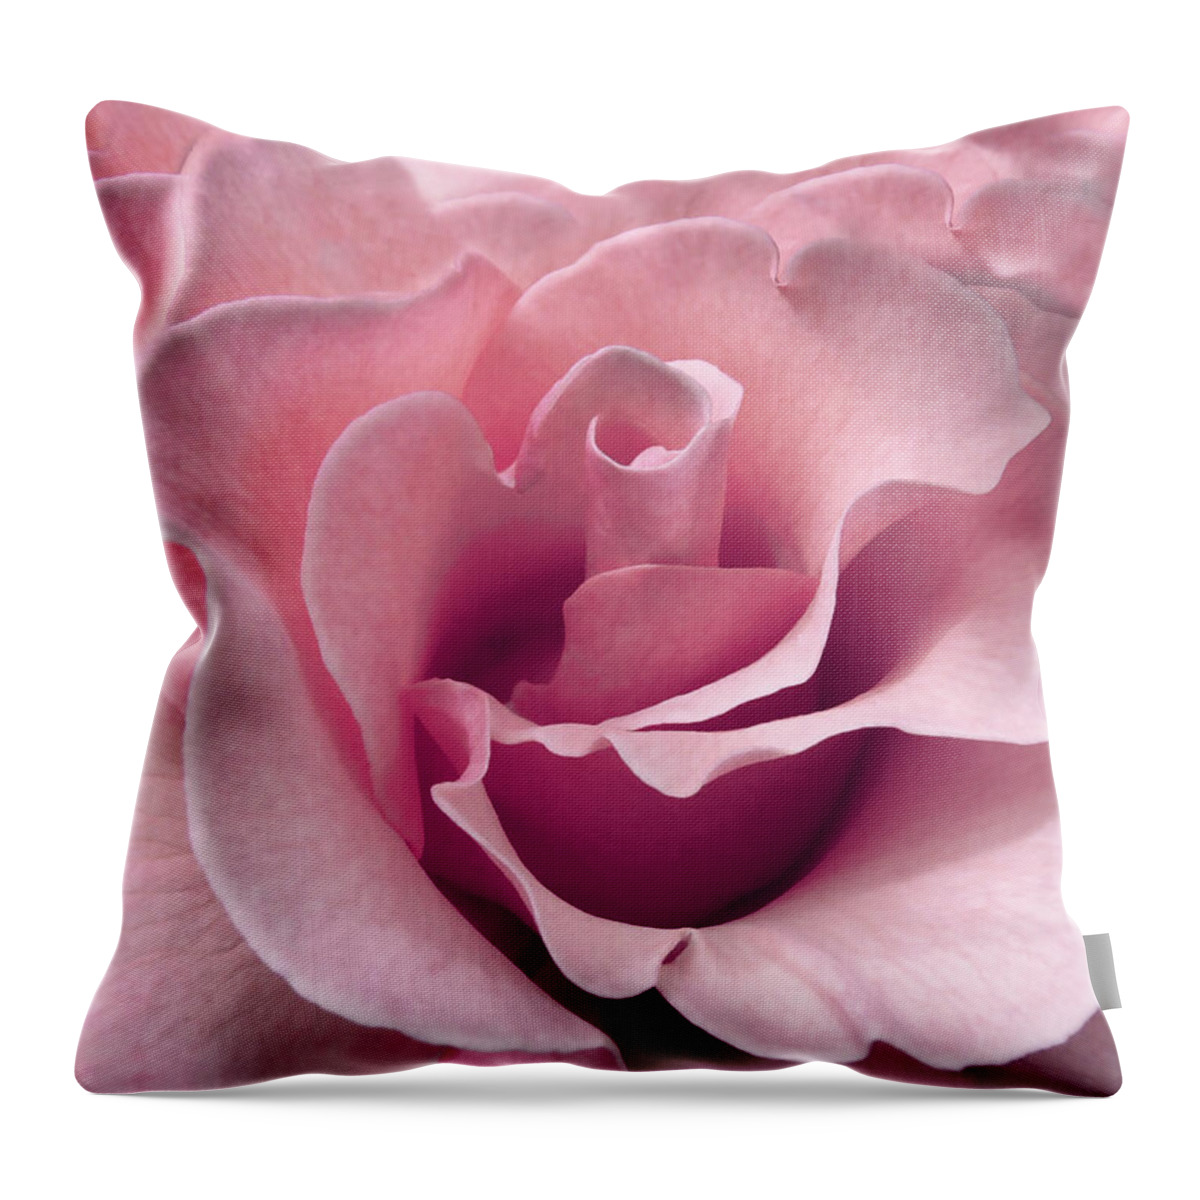 Rose Throw Pillow featuring the photograph Passion Pink Rose Flower by Jennie Marie Schell